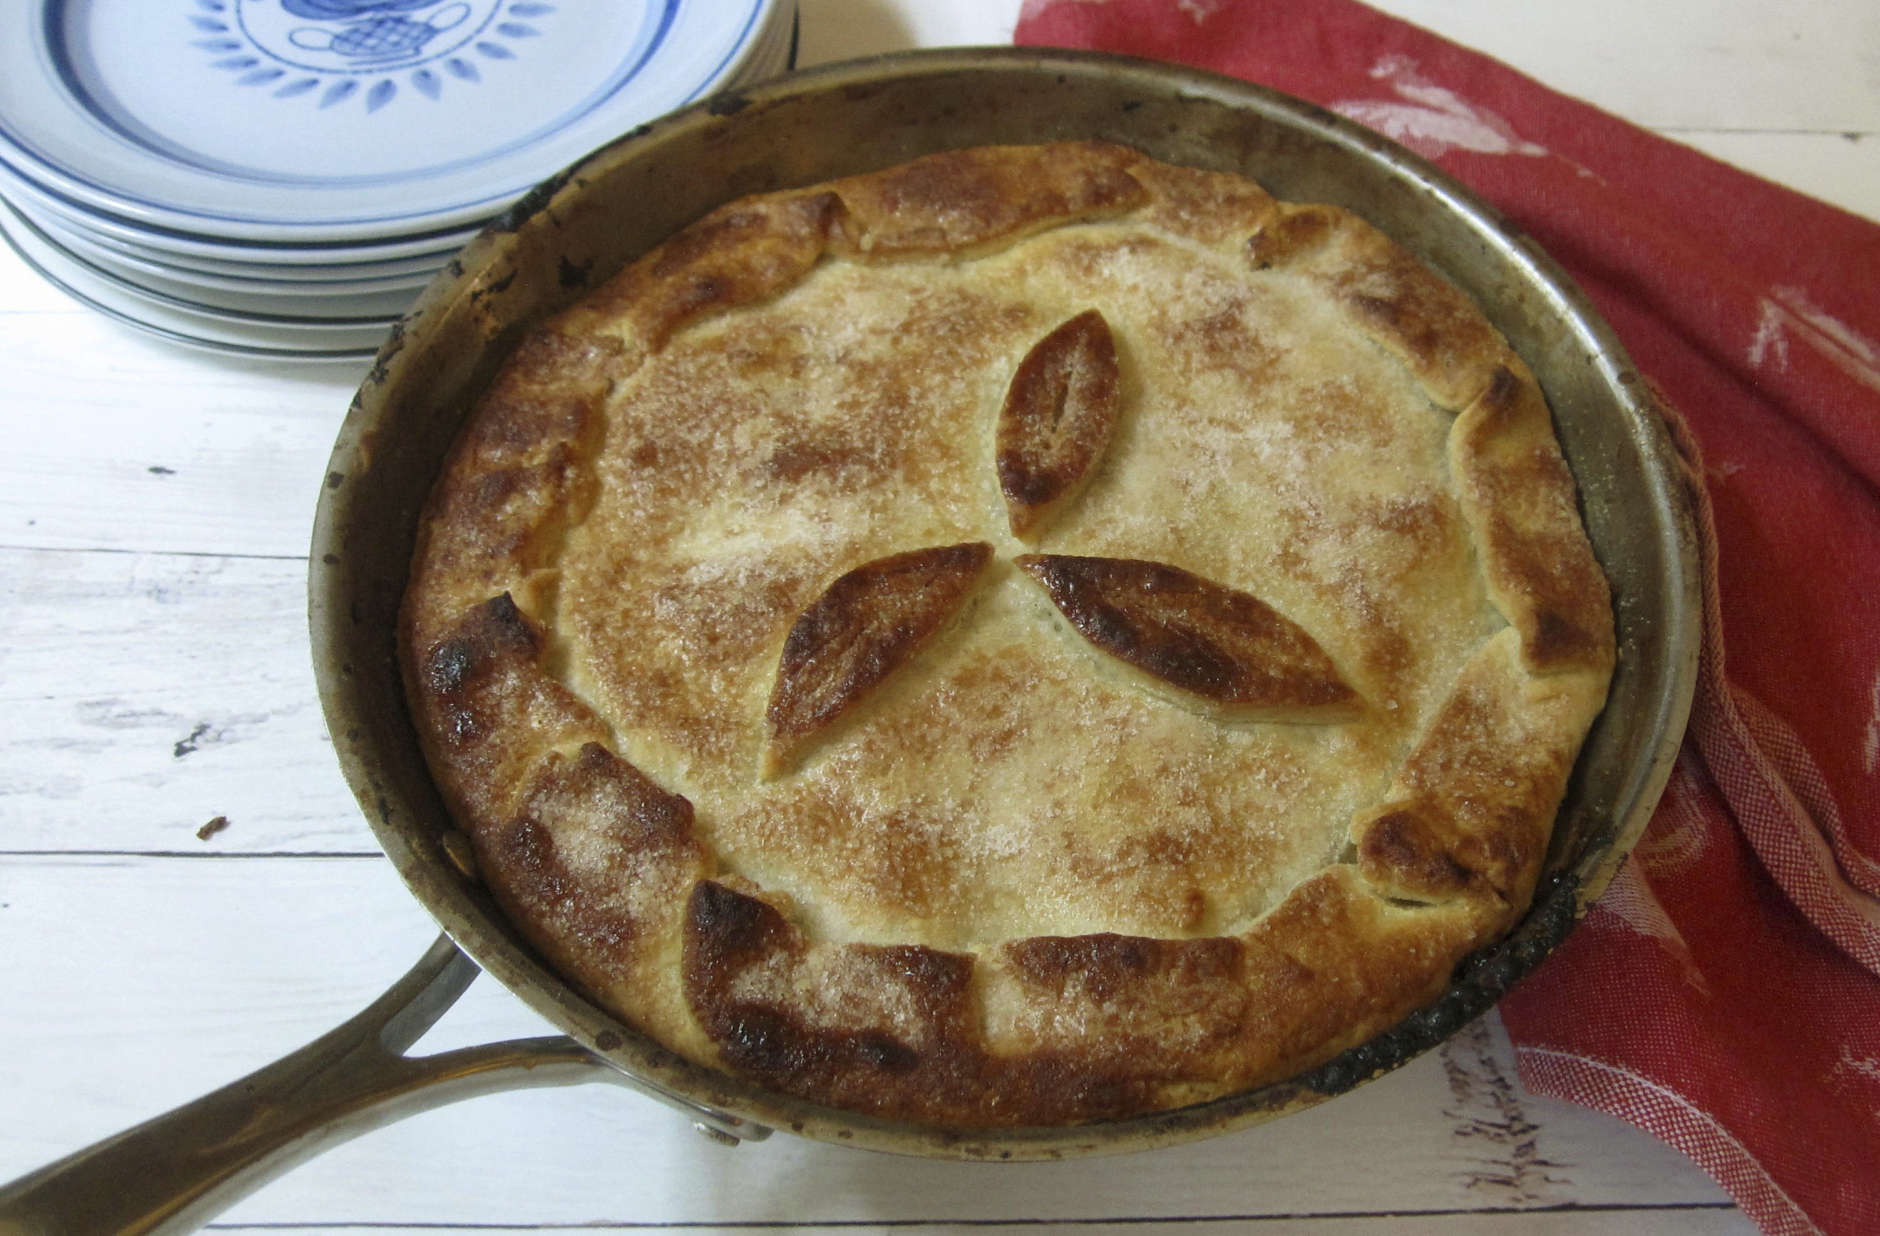 This Sept. 11, 2017 photo shows a skillet apple cranberry pie in New York. This dish is from a recipe by Sara Moulton. (Sara Moulton via AP)